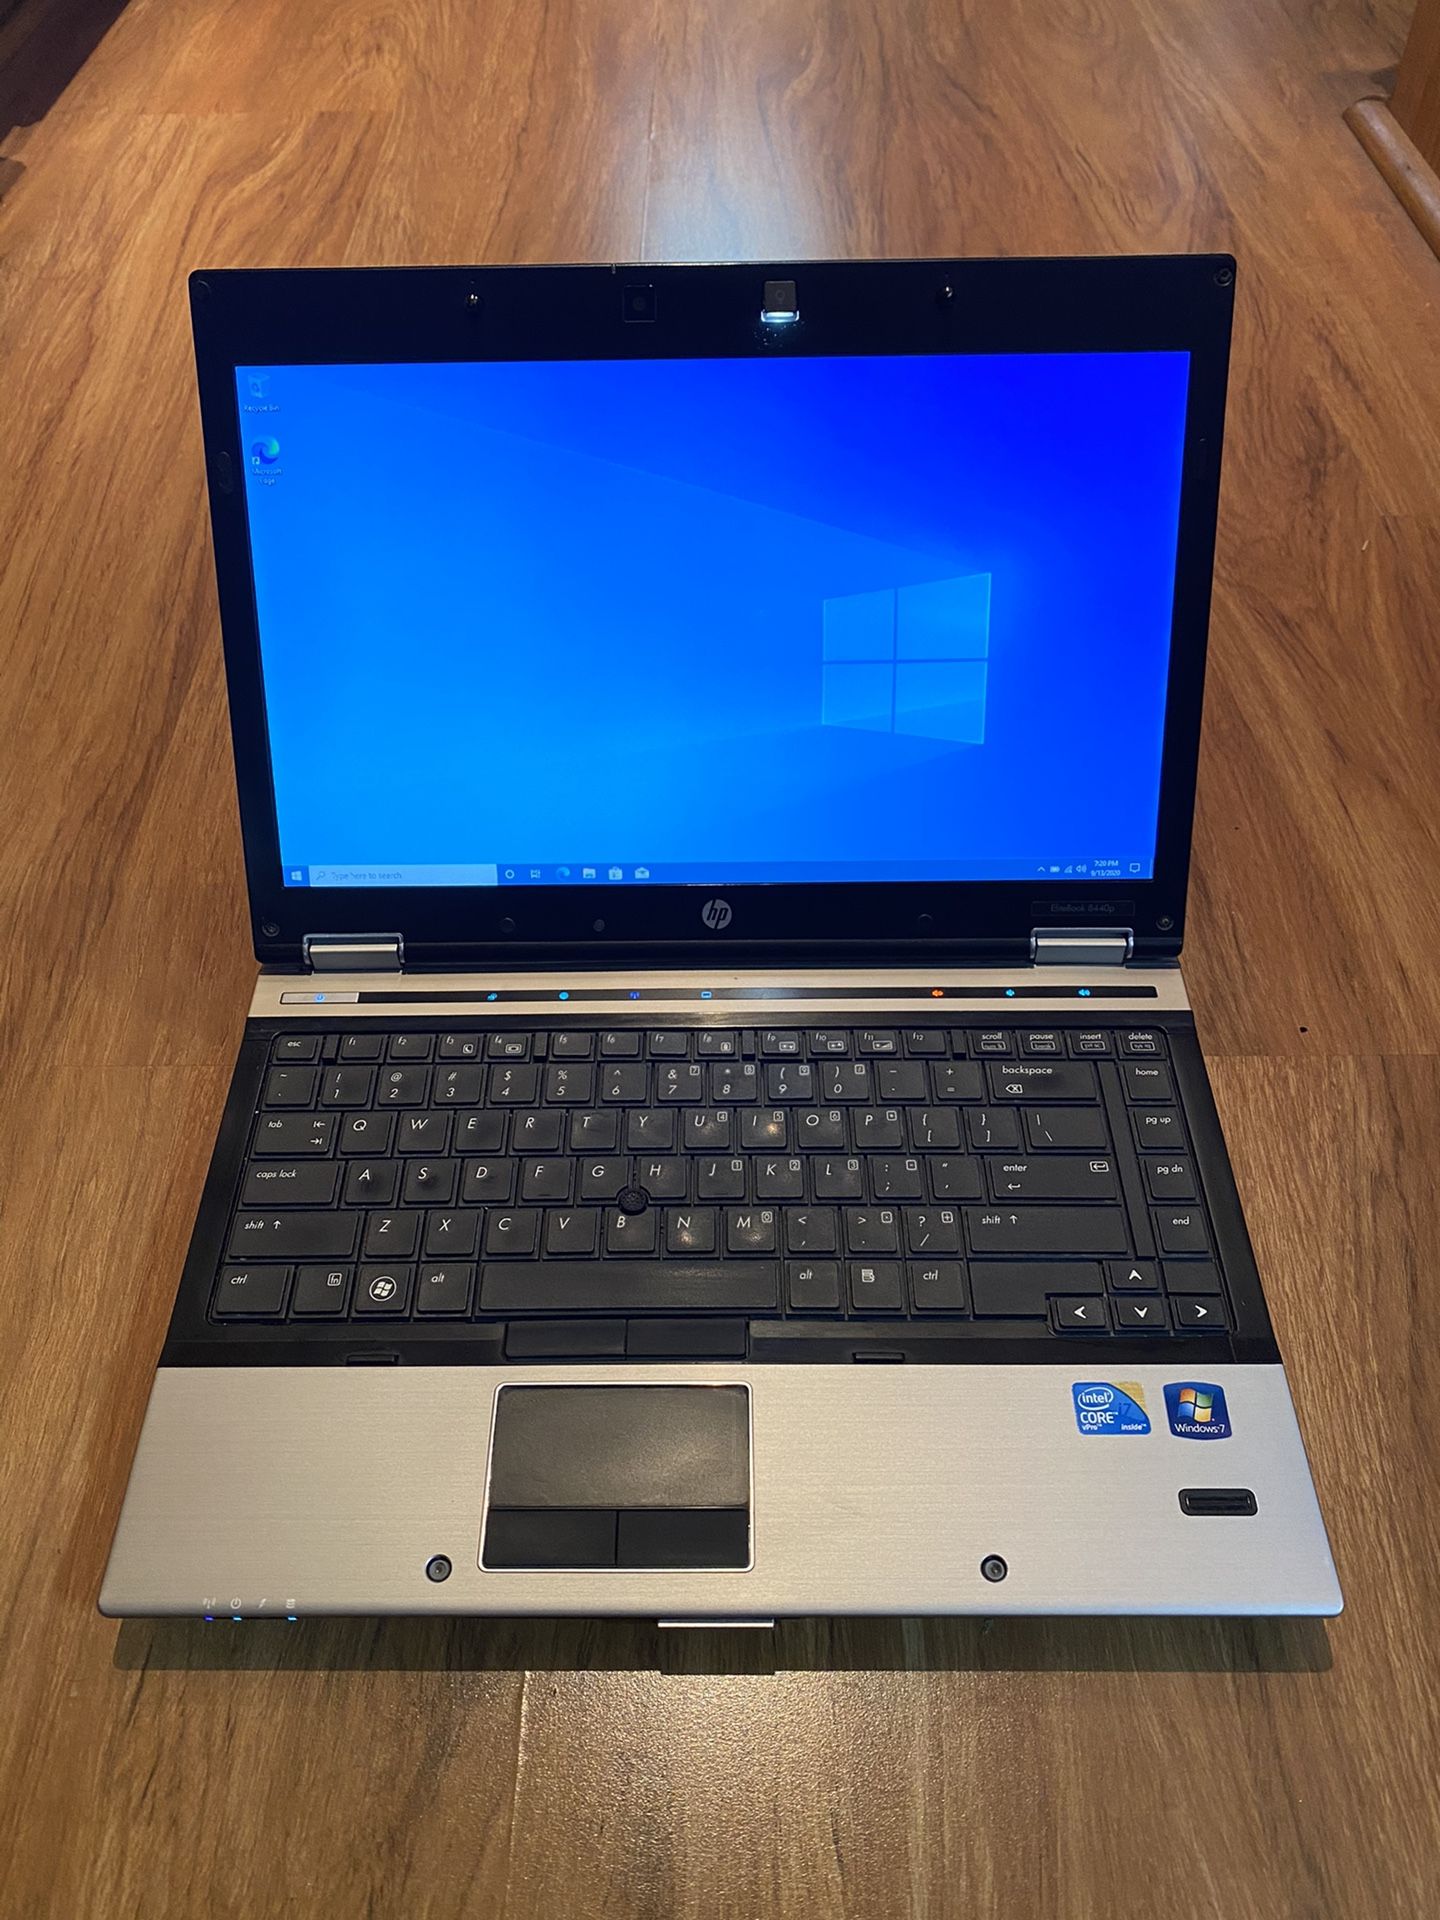 HP EliteBook 8440p core i7 8GB Ram 500GB Hard Drive 14.1 inch HD Screen Laptop with charger in Excellent Working condition!!!